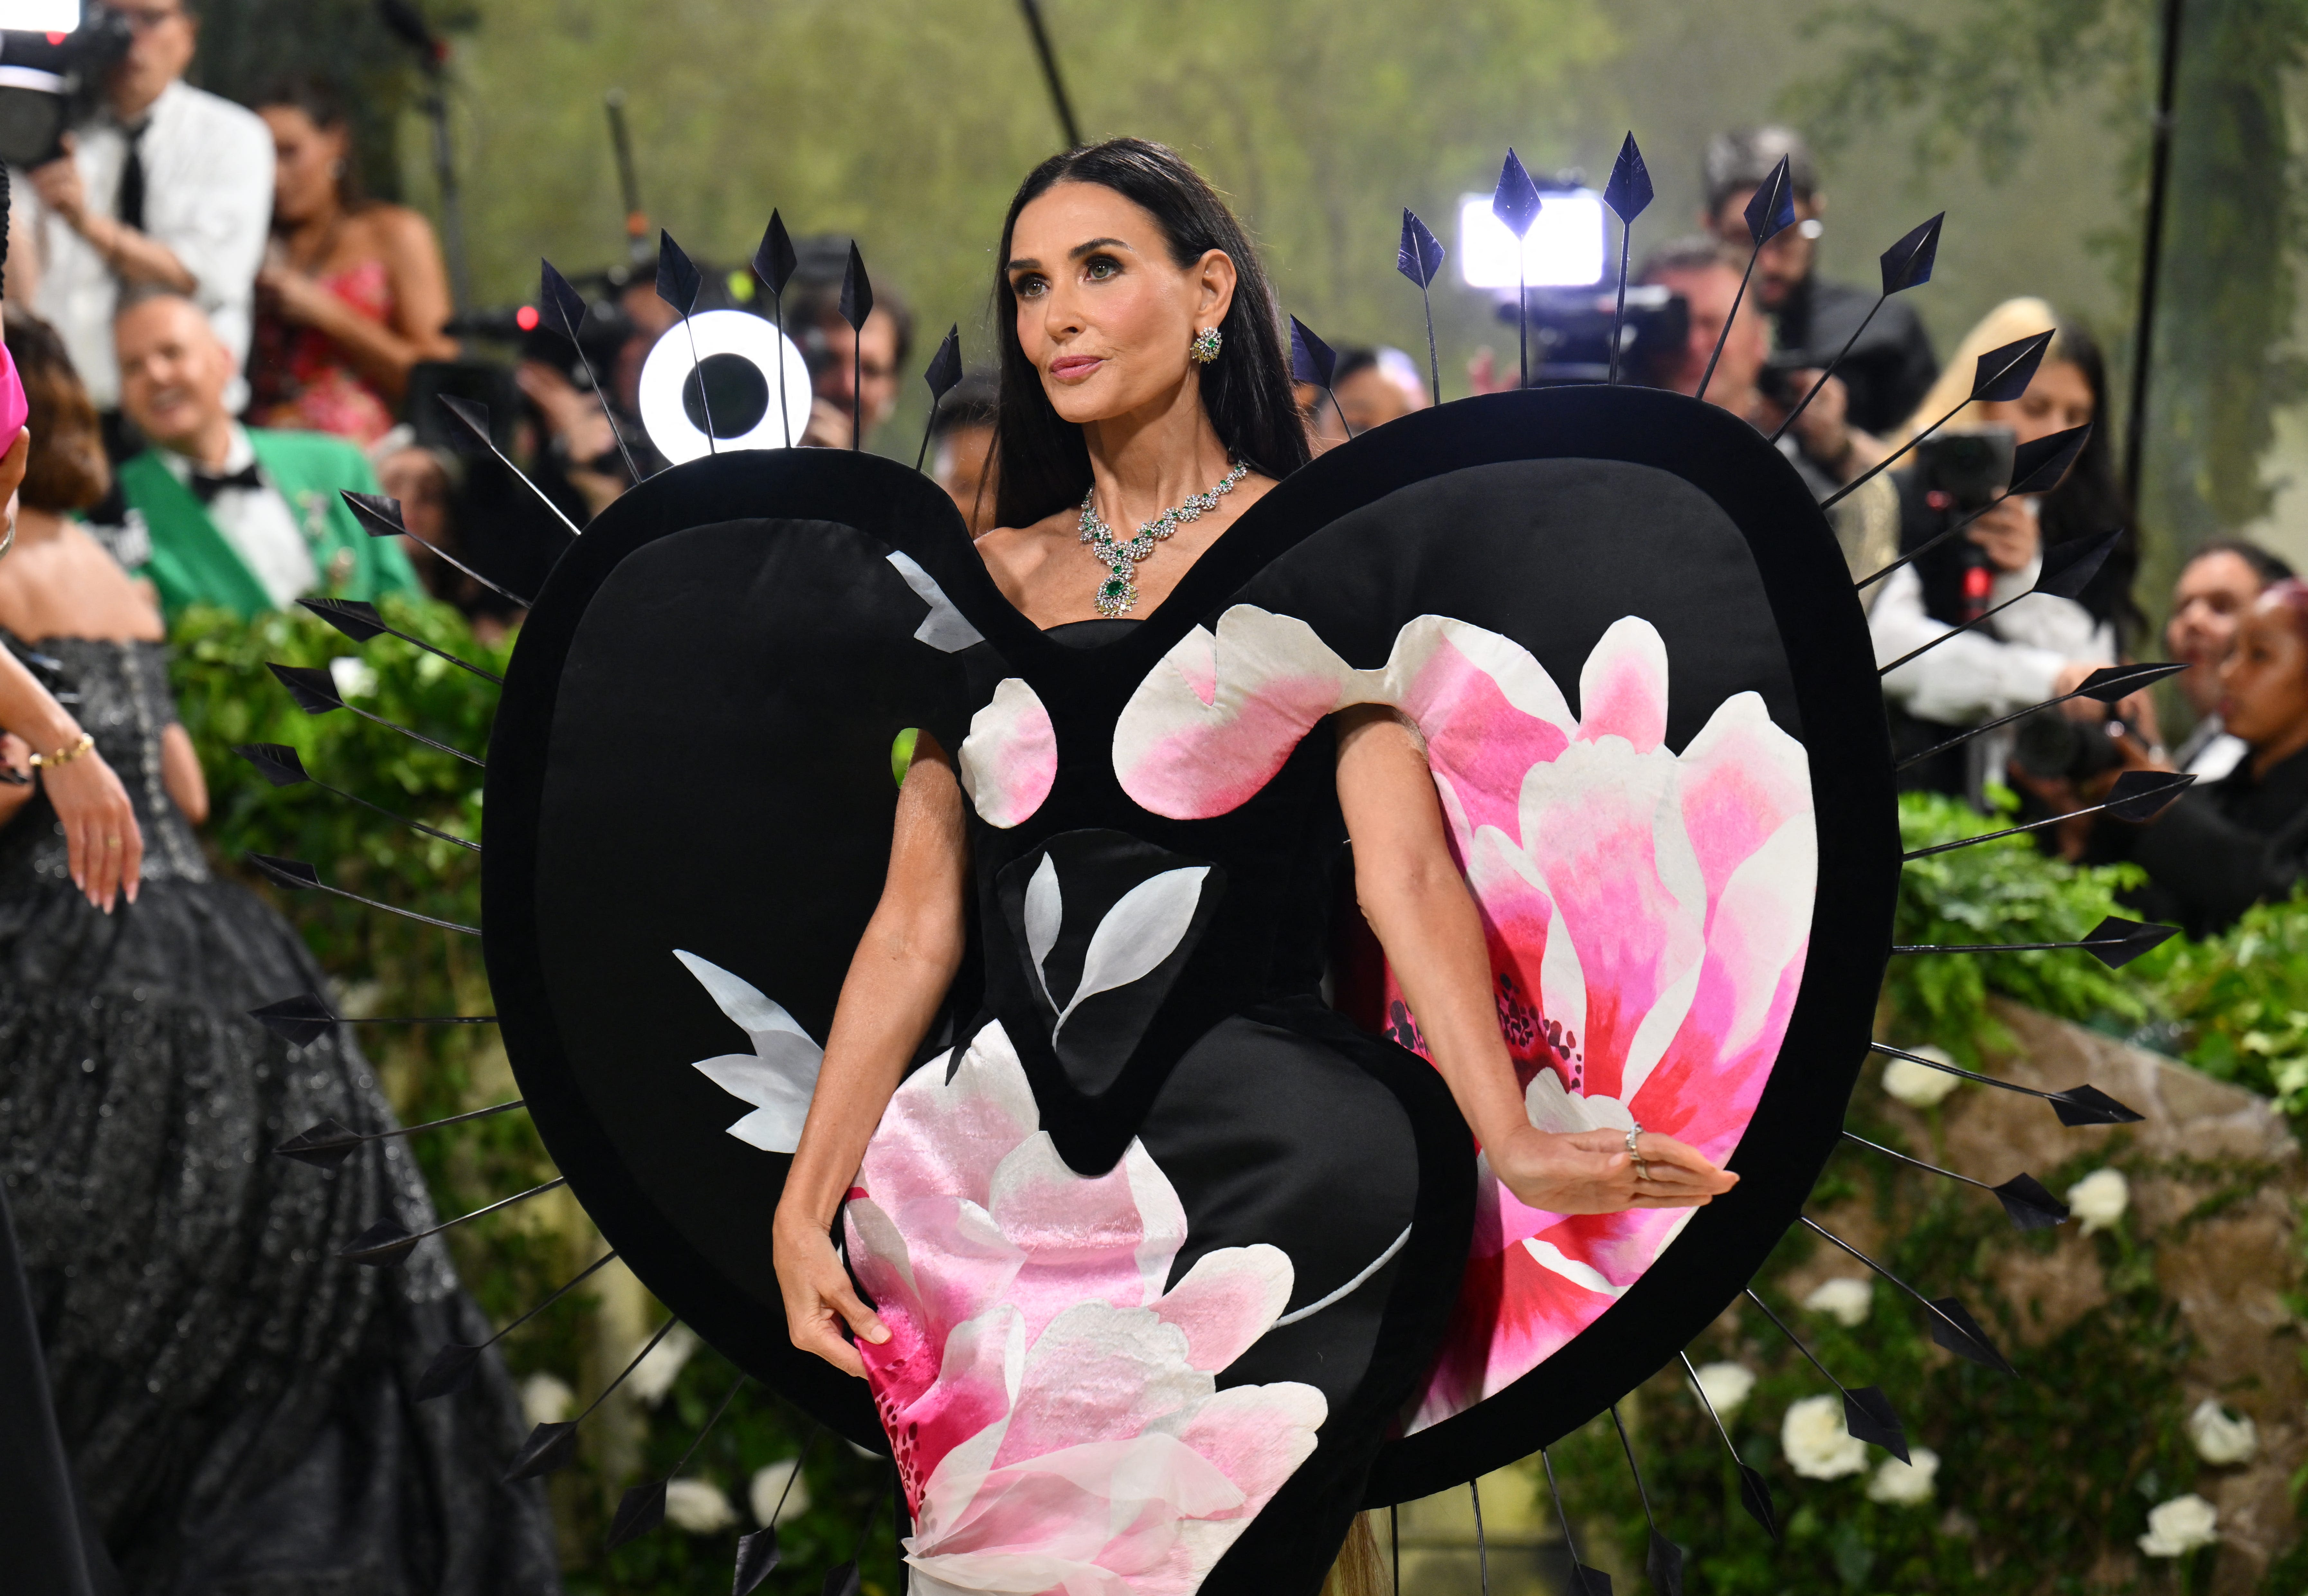 Met Gala outfits can't easily be recreated at home — but we have ideas